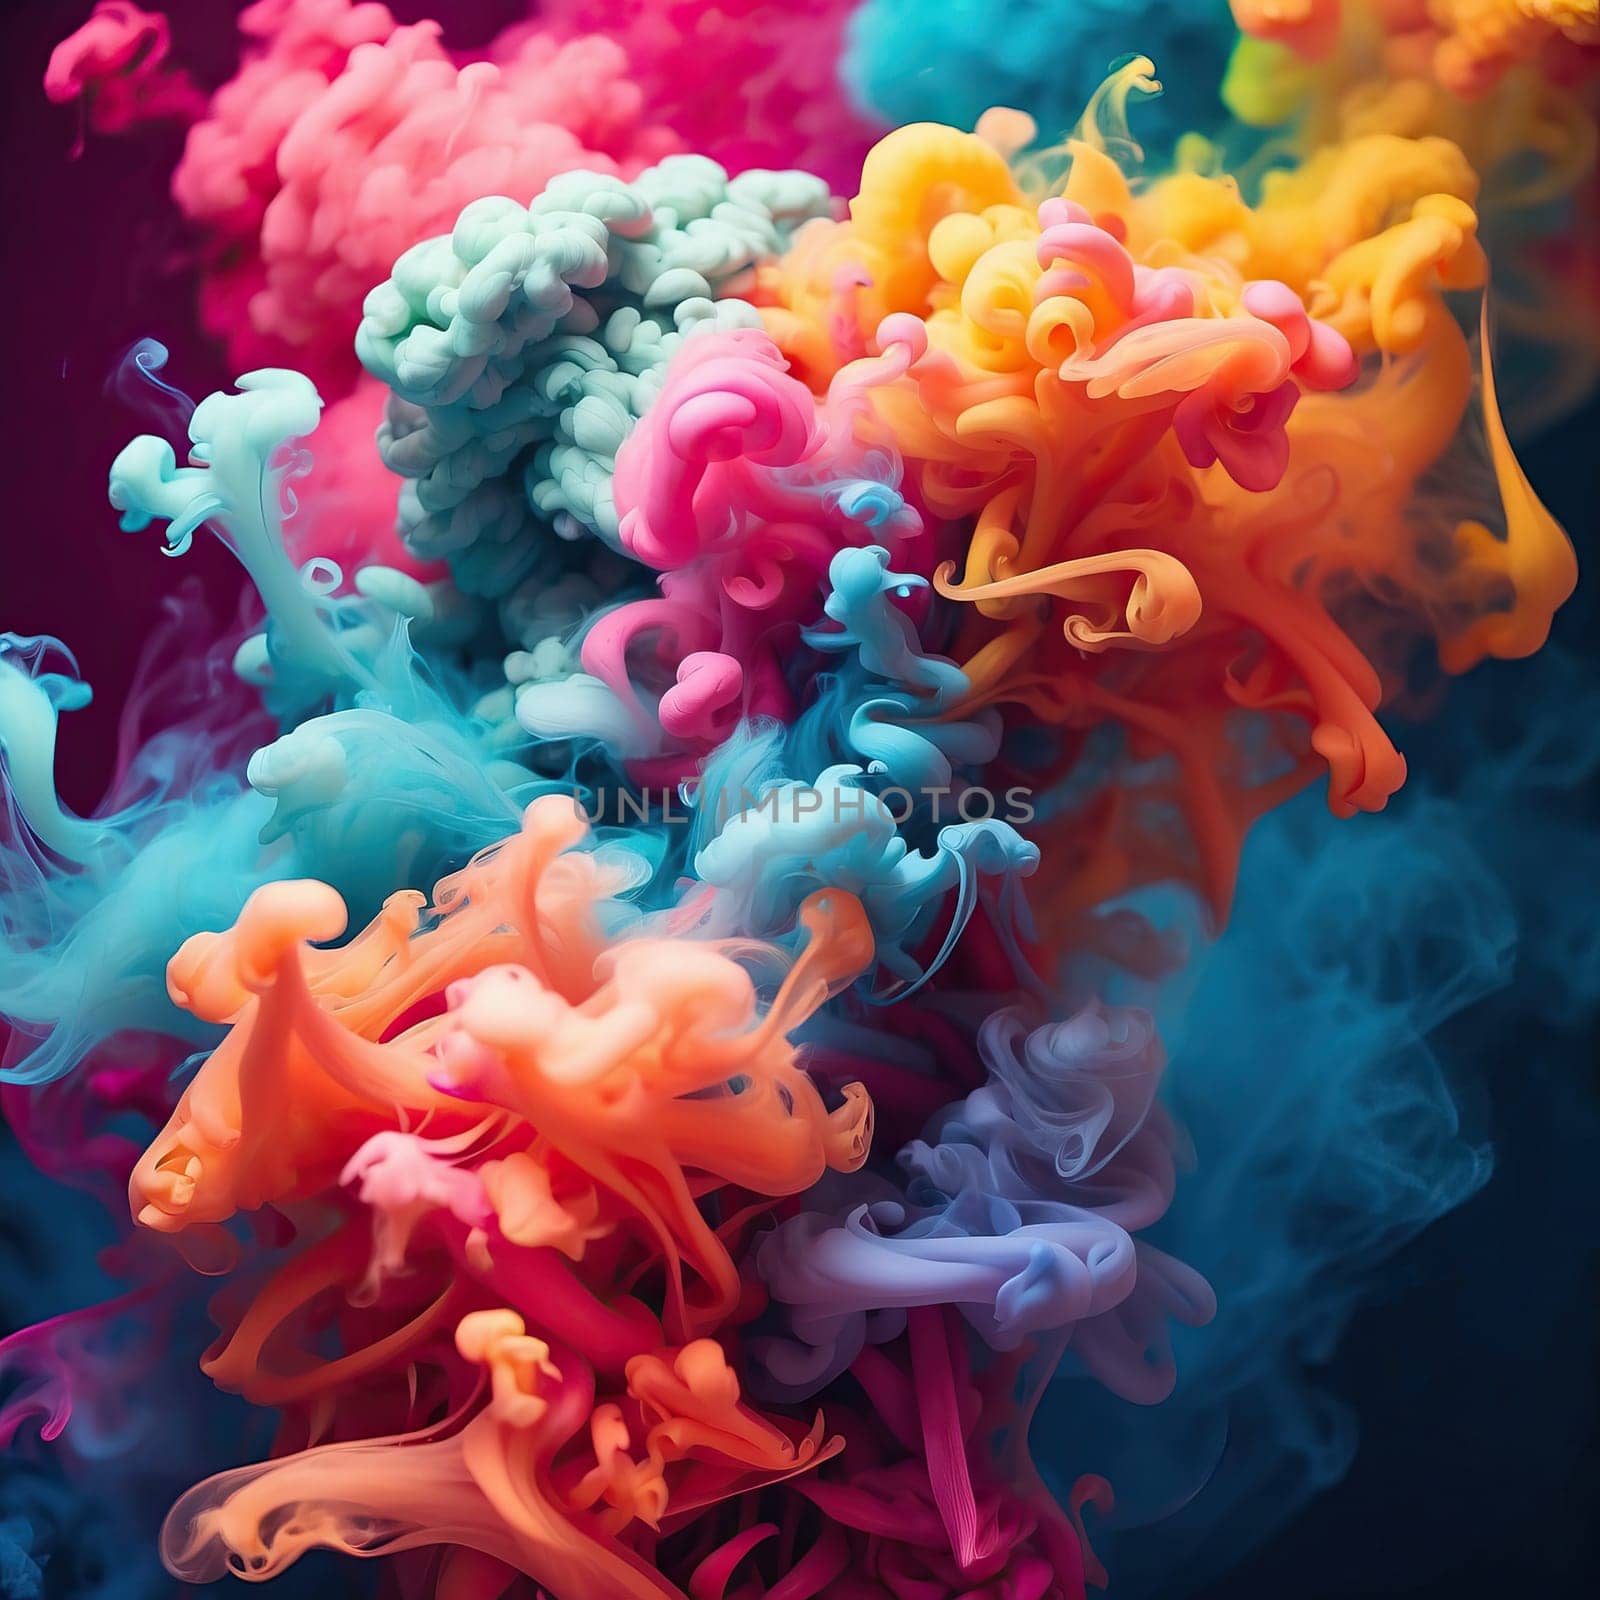 Clouds of colored smoke by applesstock